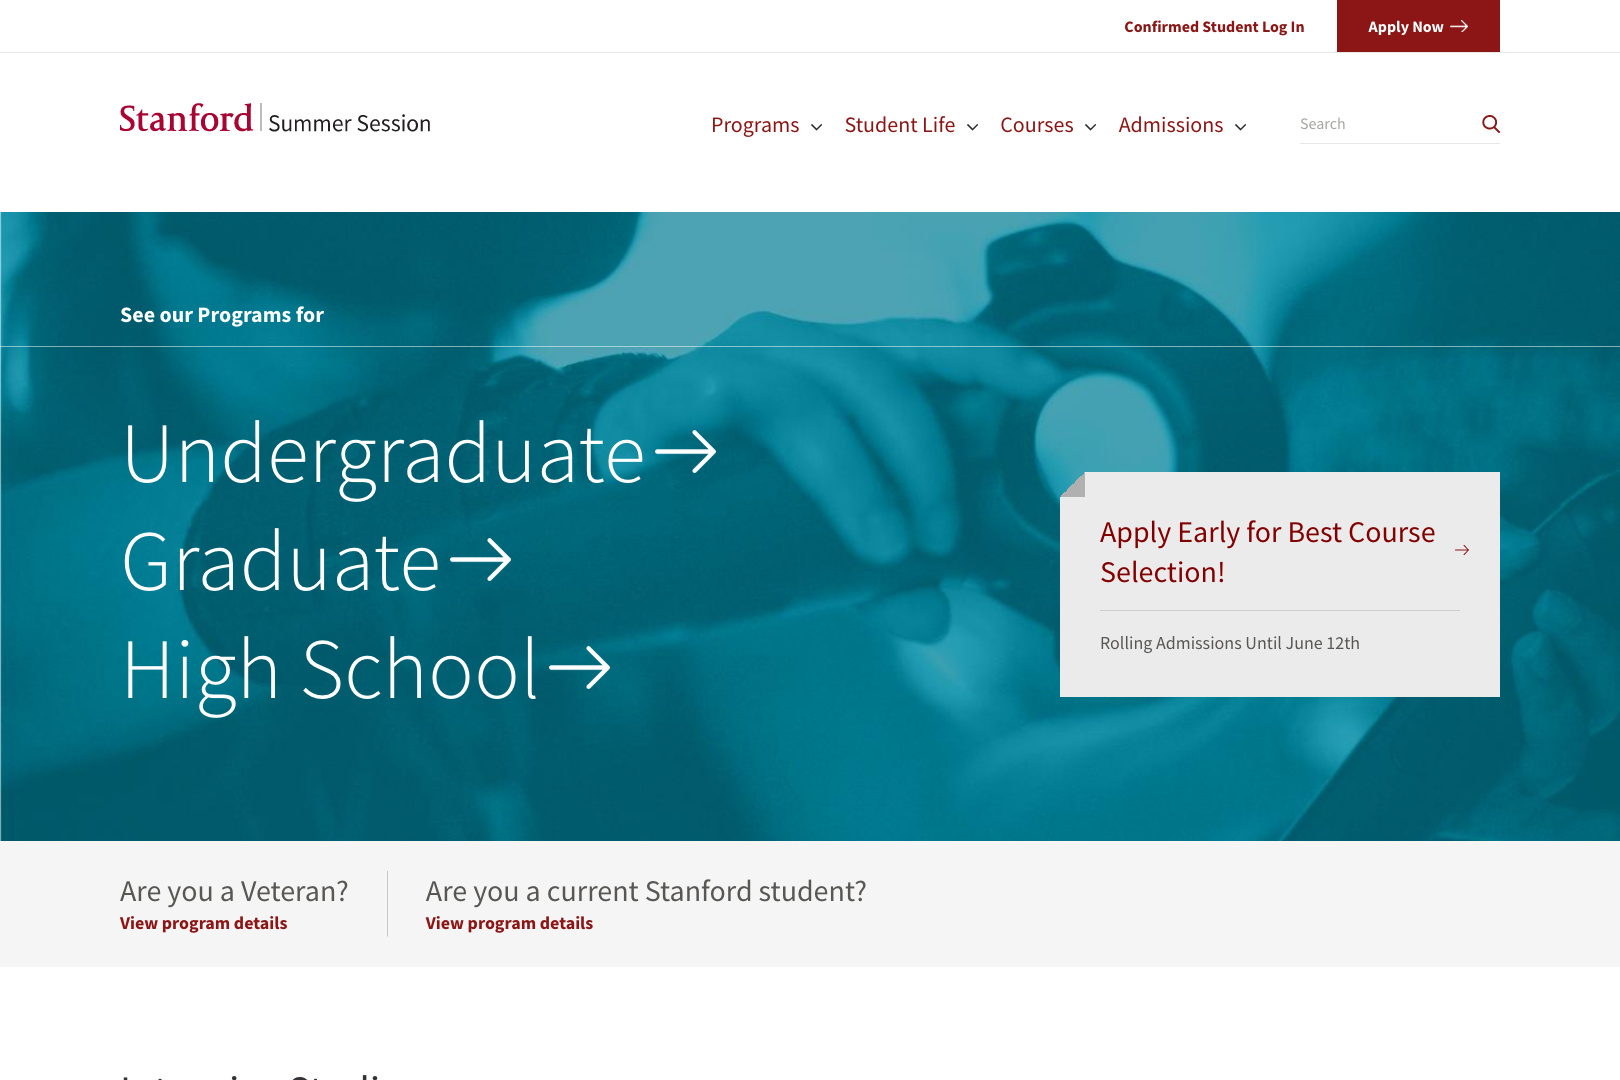 A screenshot of the Stanford Summer Session Programs page